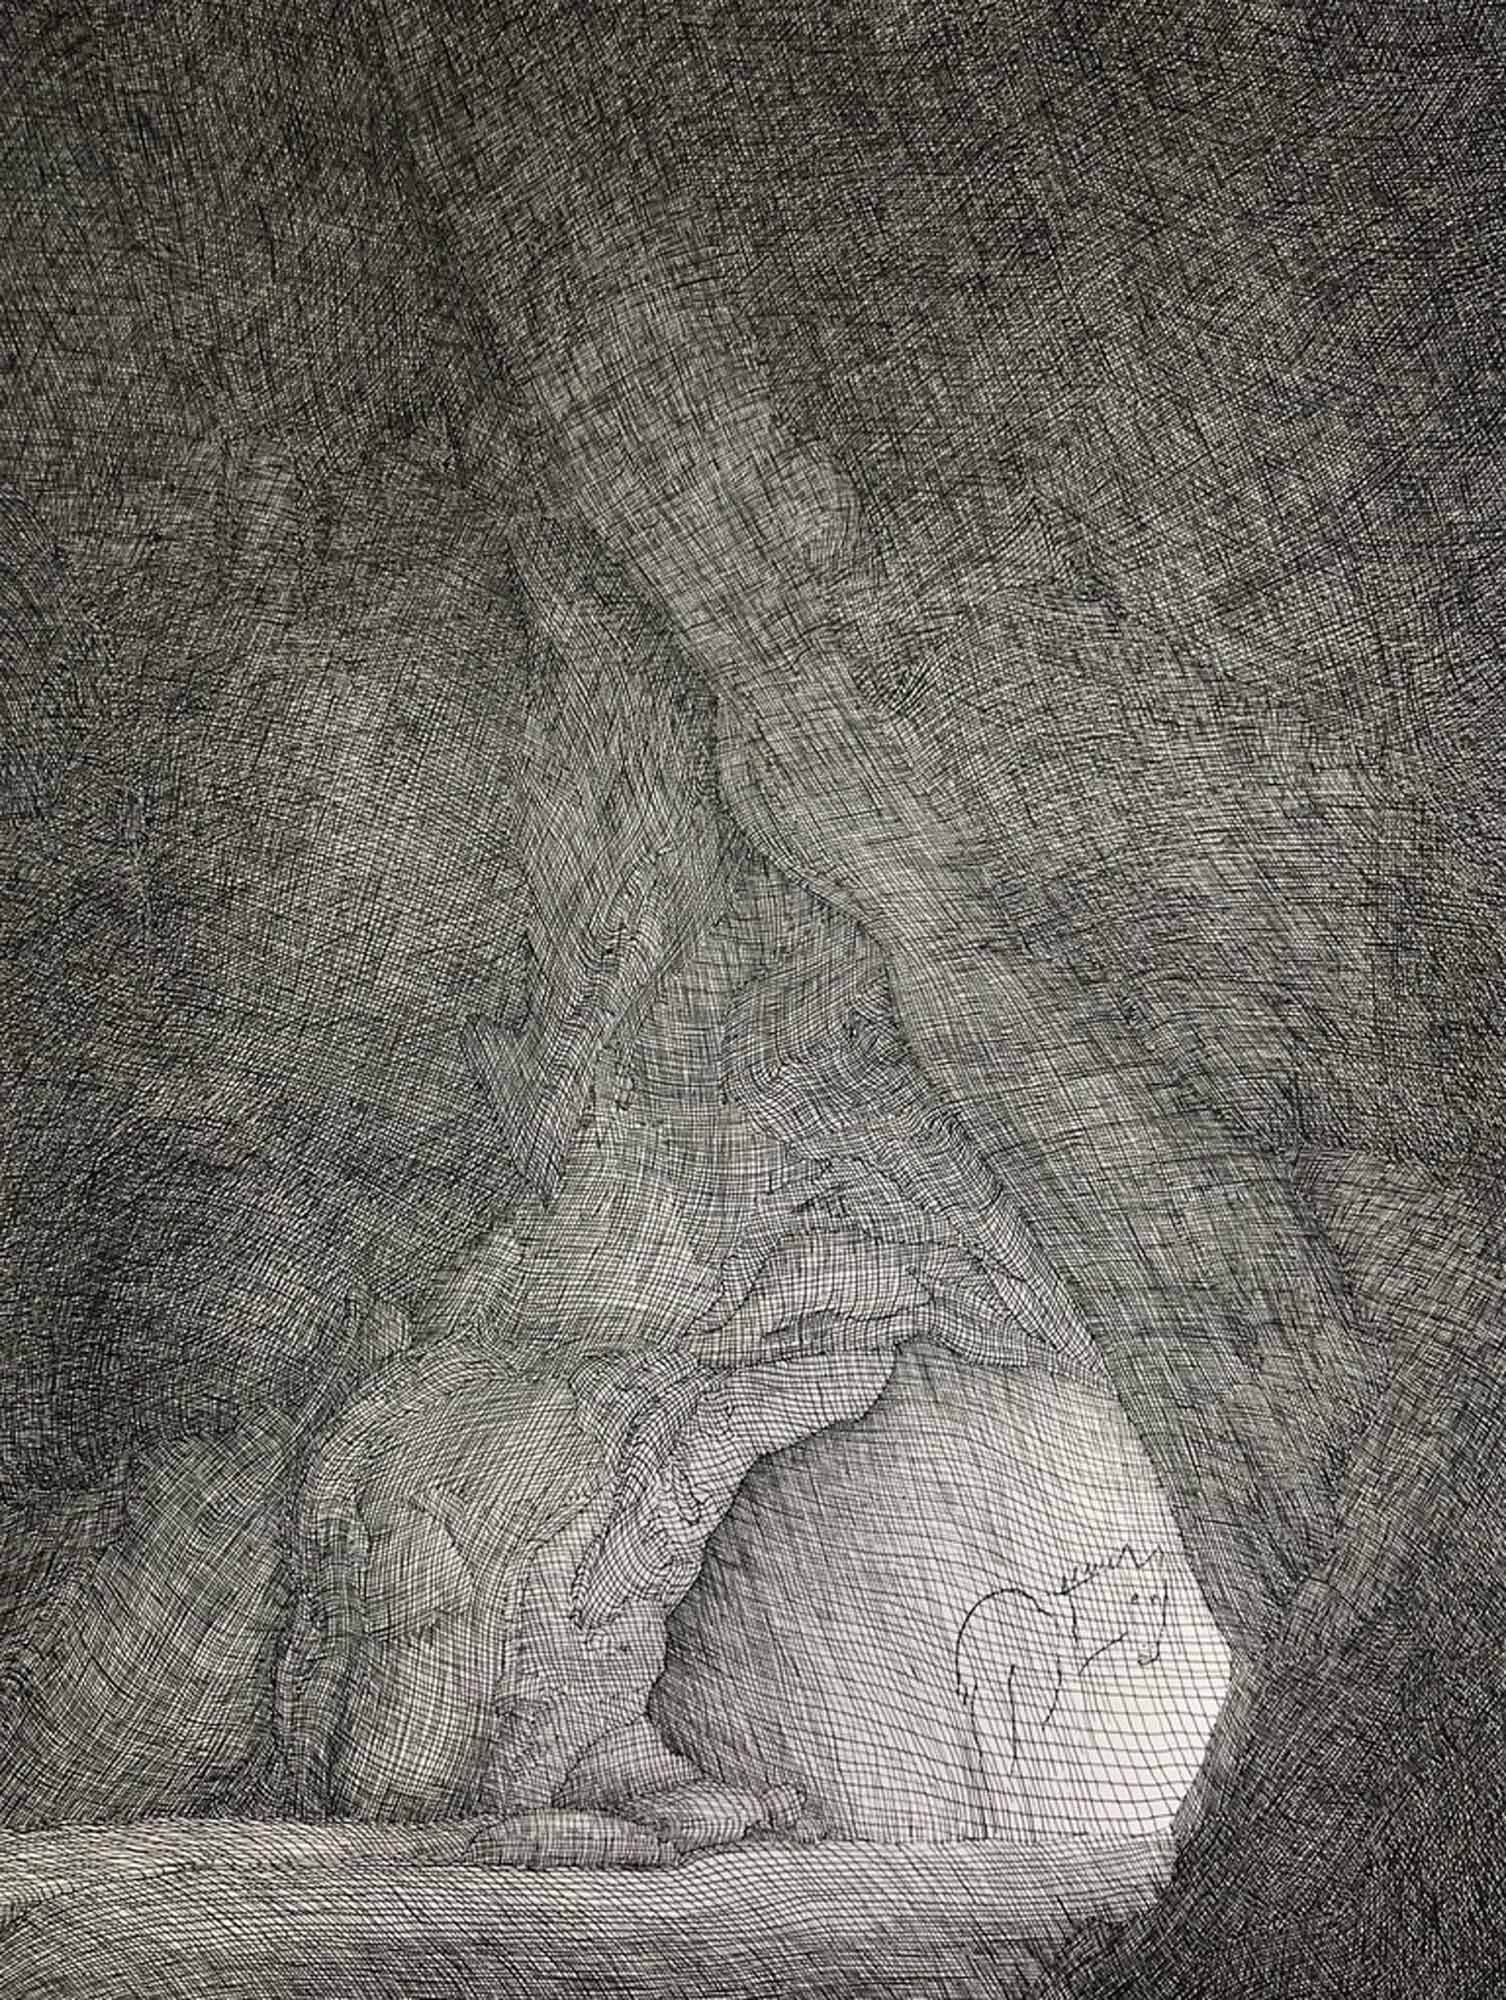 Mark Alexander's ink drawing: Horse nestled within textured cave, intricate shading and detail.